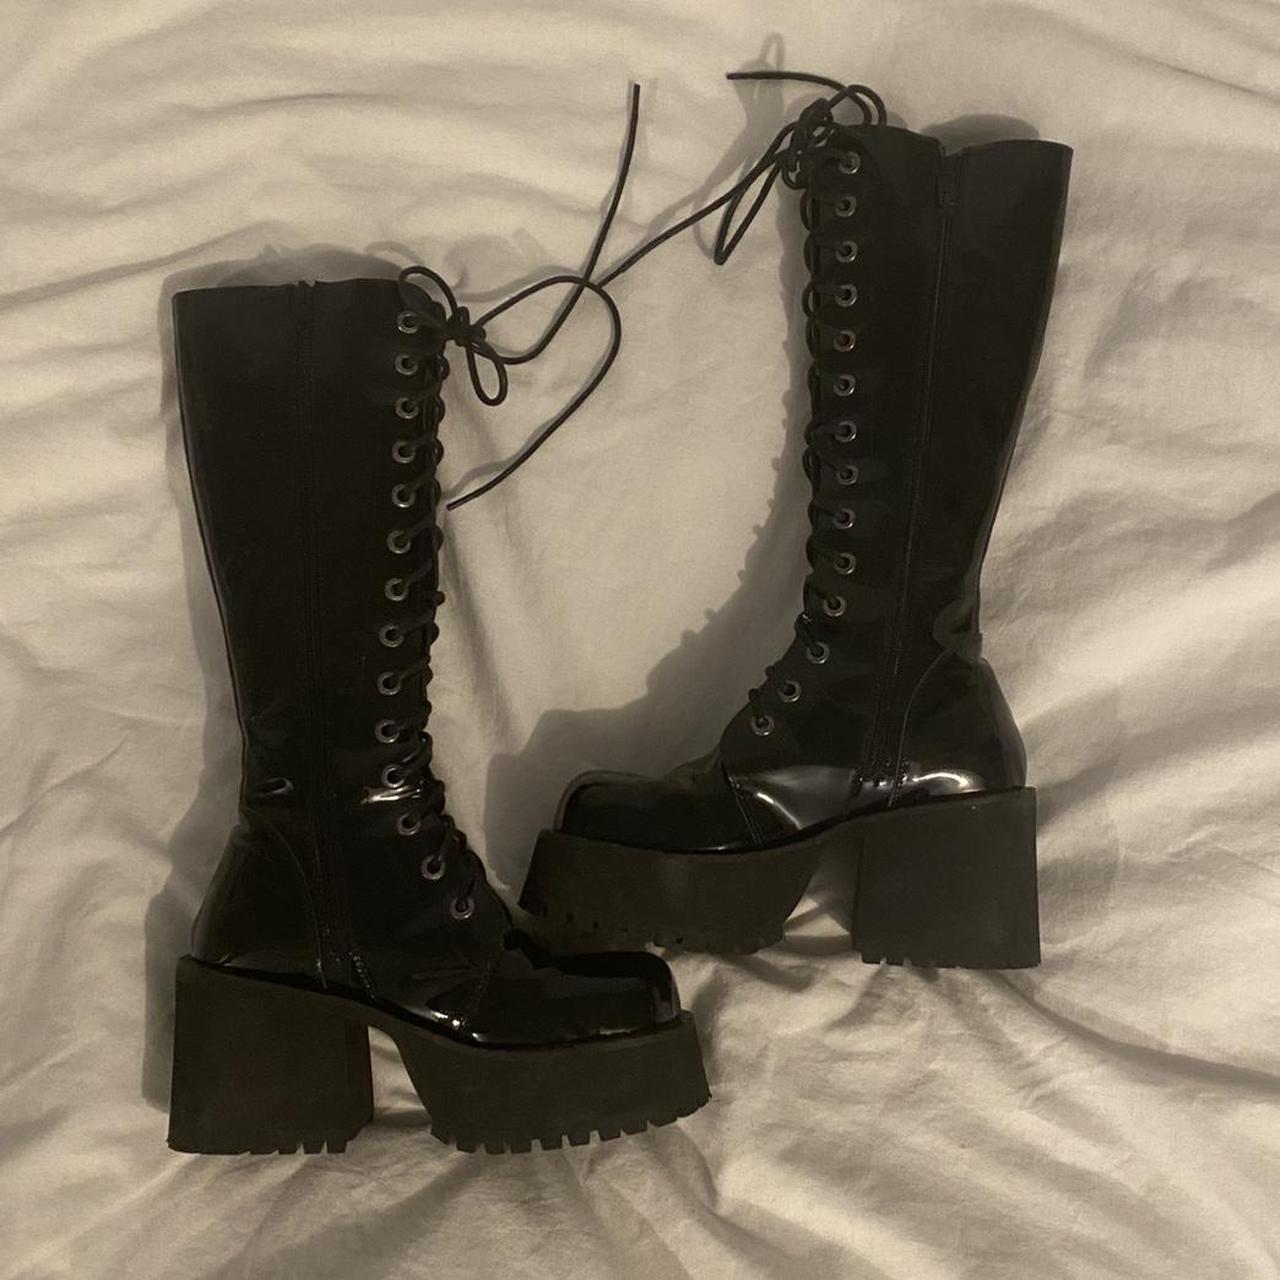 Unif trinity boots! 🖤 in a size 7 (sold out on the... - Depop